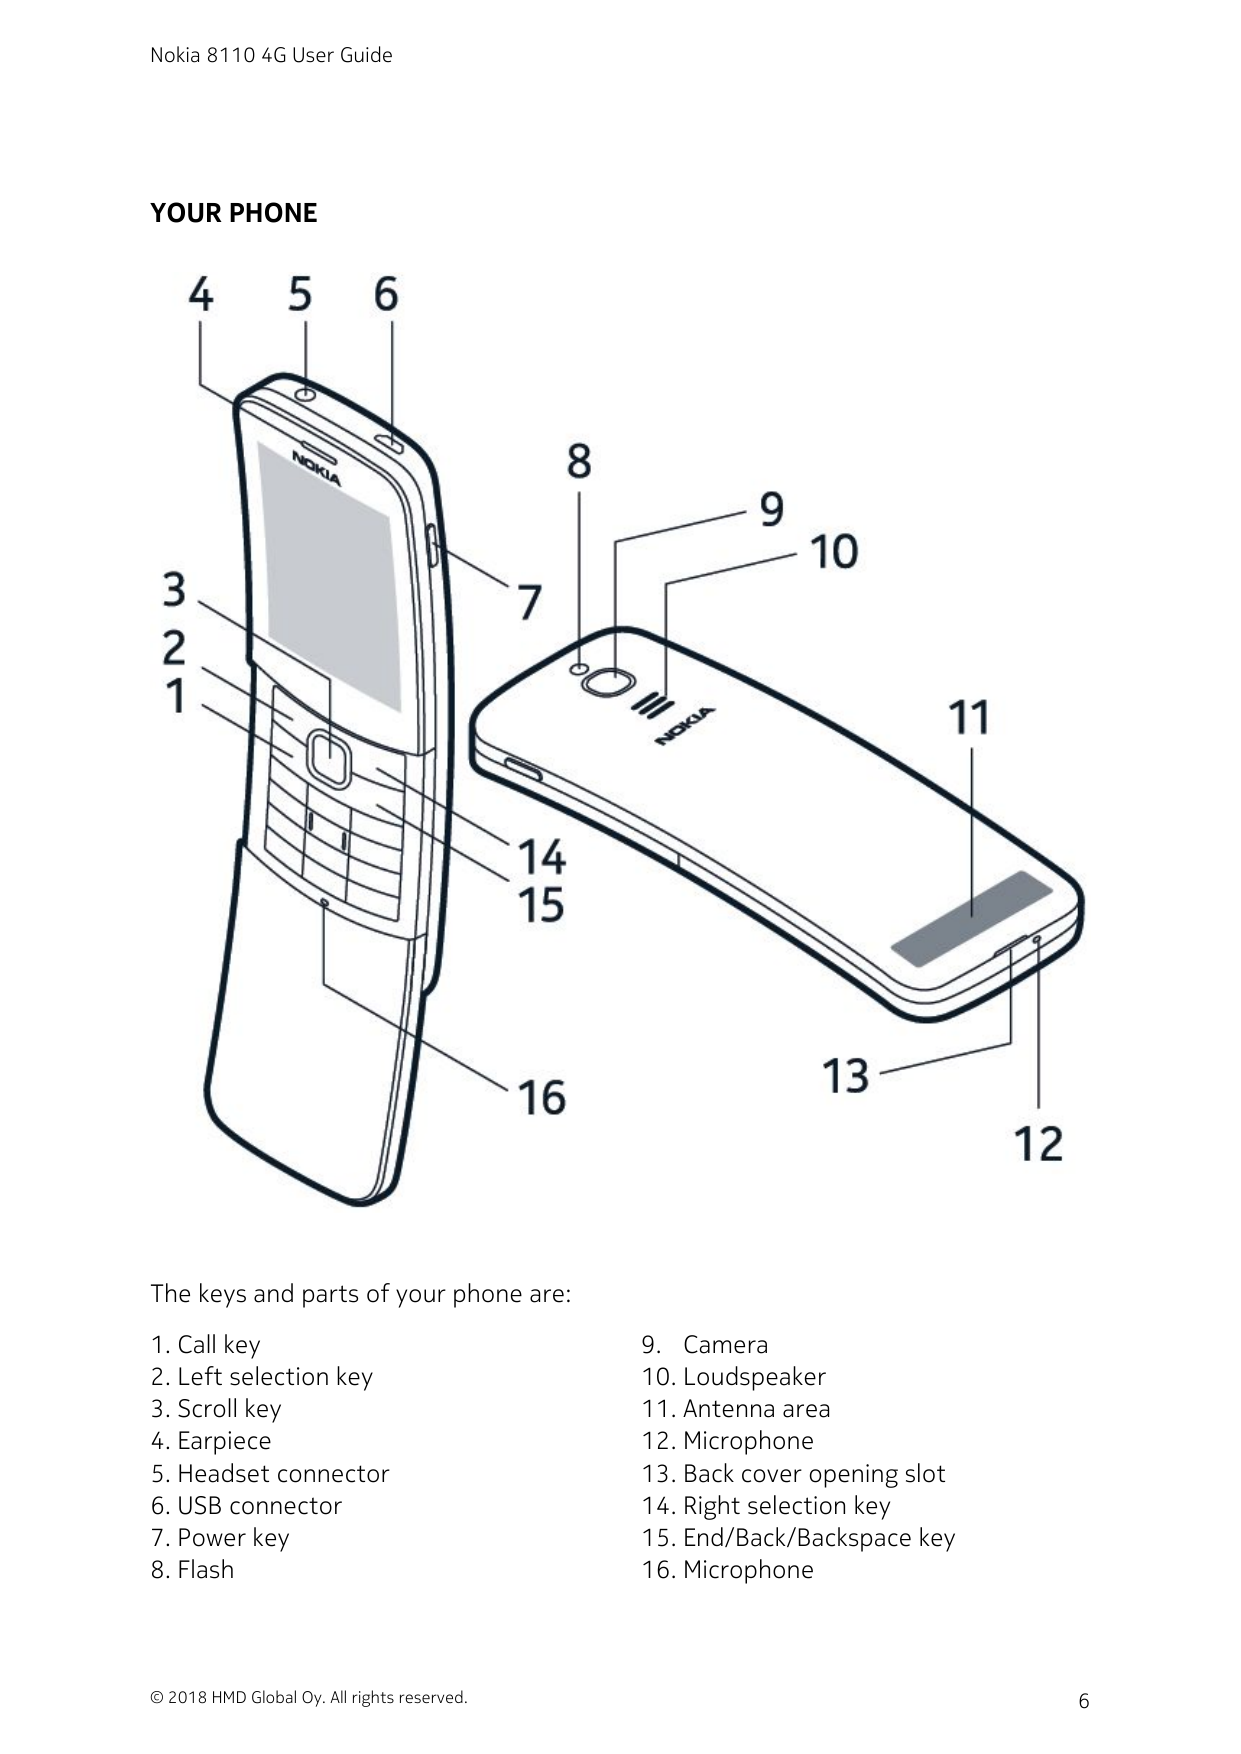 Nokia 8110 4G User GuideYOUR PHONEThe keys and parts of your phone are:1. Call key2. Left selection key3. Scroll key4. Earpiece5